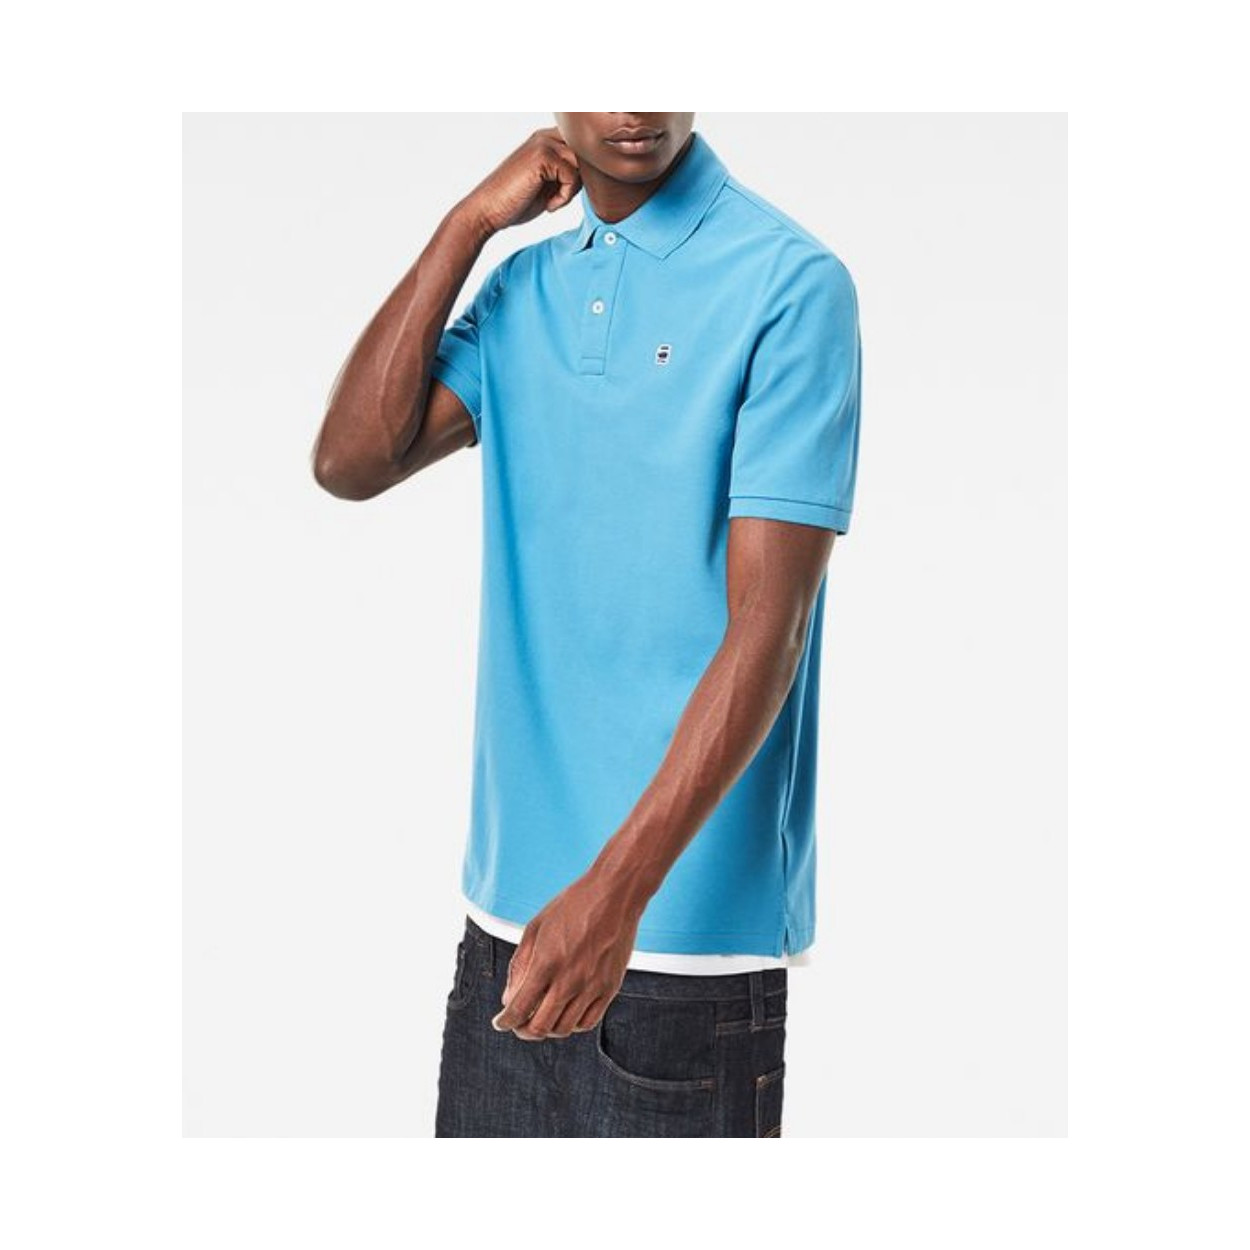 polo homme g star